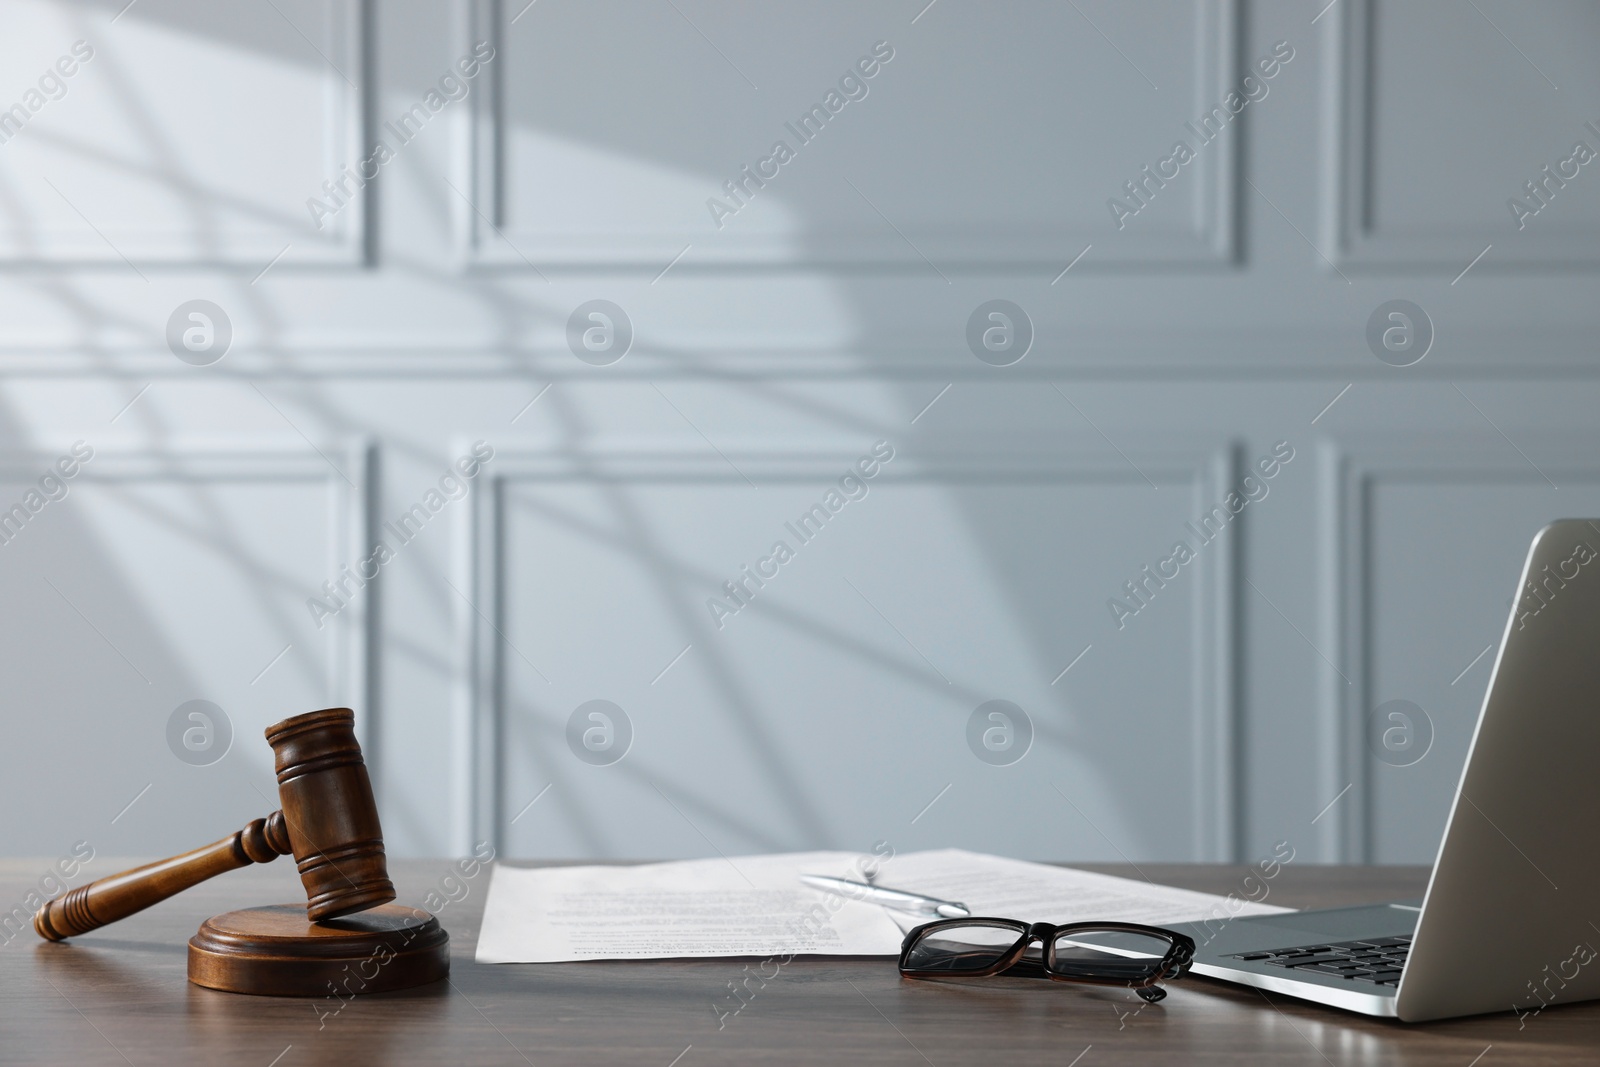 Photo of Gavel, papers, glasses and laptop on wooden table indoors. Judge workplace